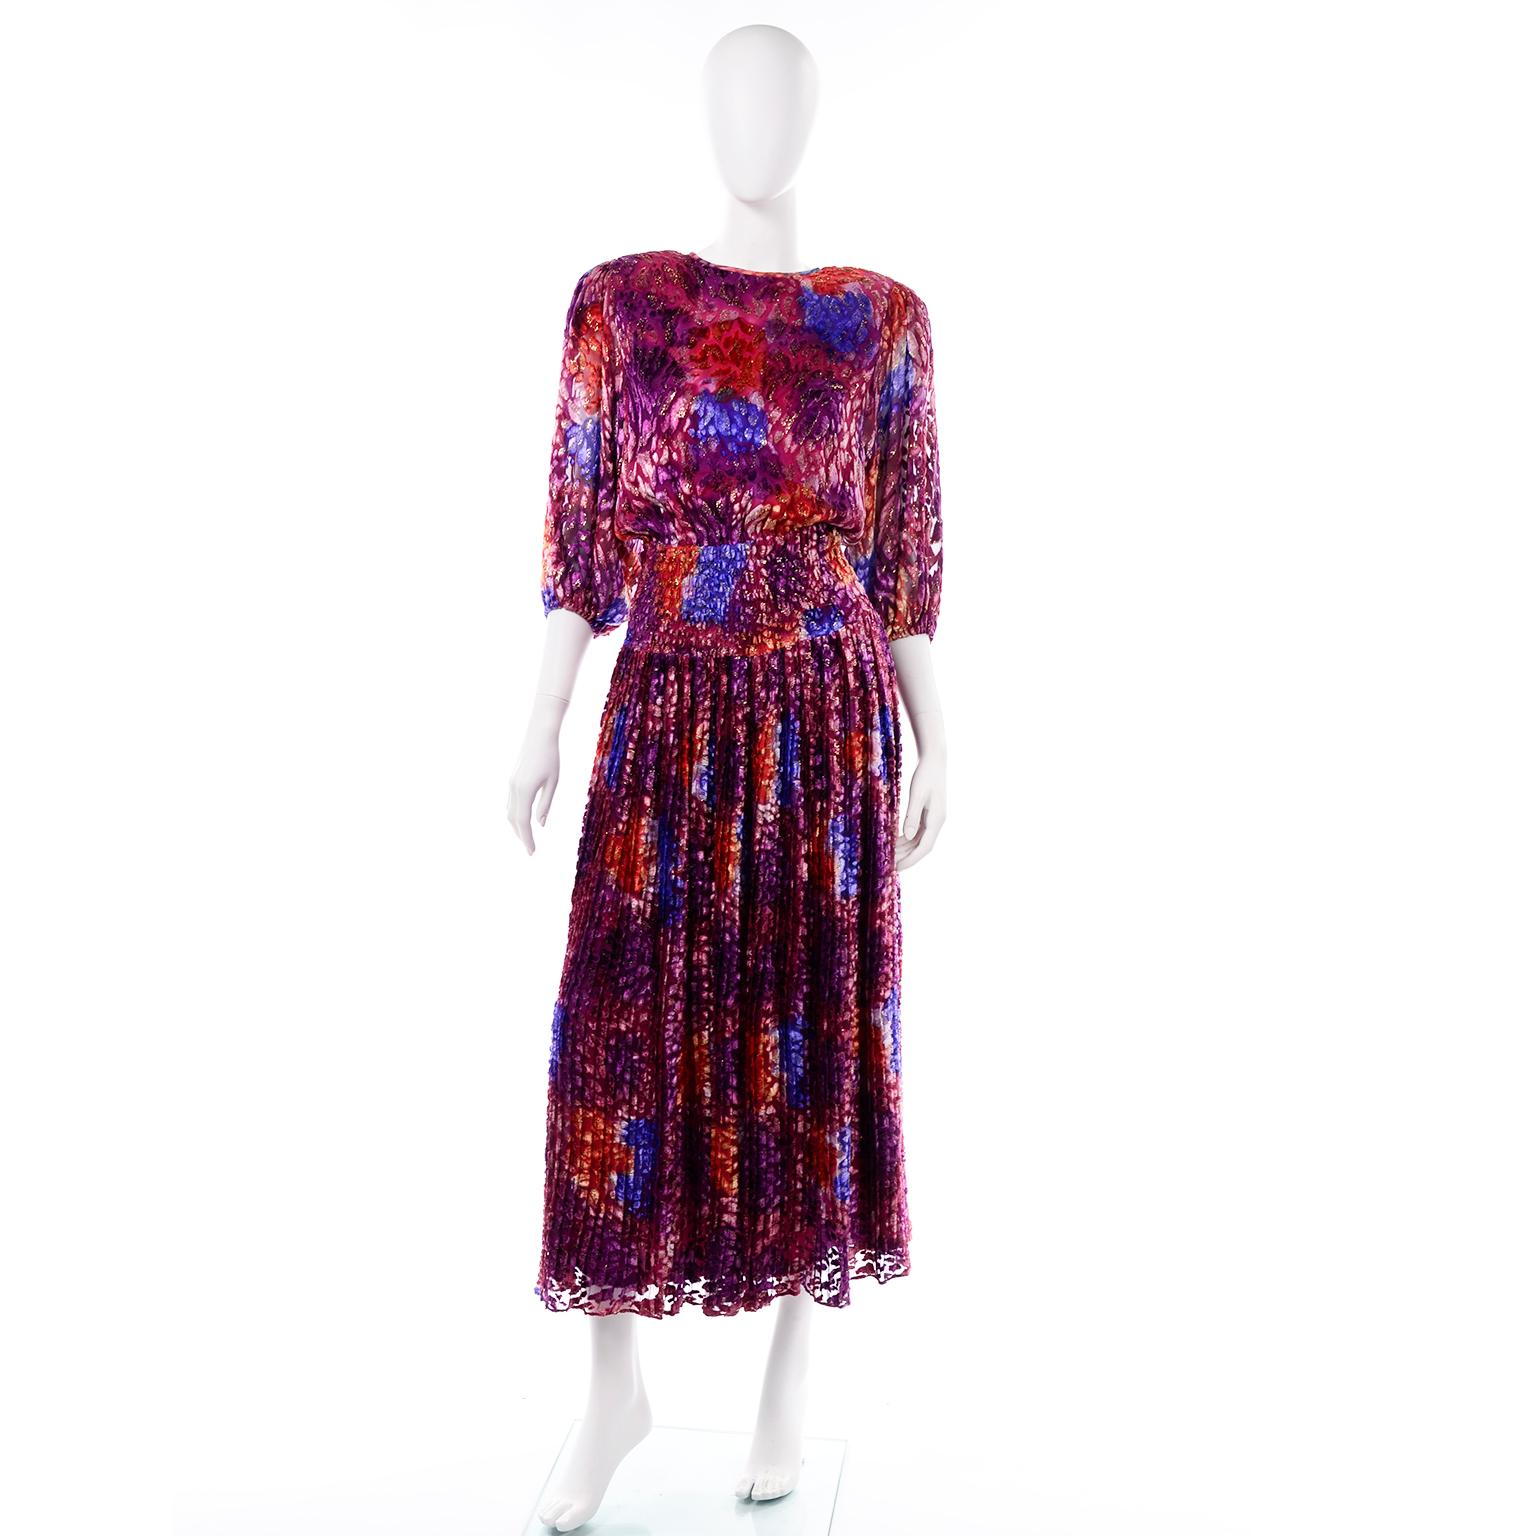 We are obsessed with this vintage Diane Freis Silk Dress! We adore the fabric and the open lattice work in the back! This gorgeous dress is 100% Silk and is made in a burnout velvet abstract watercolor pattern fabric with metallic accents.  The